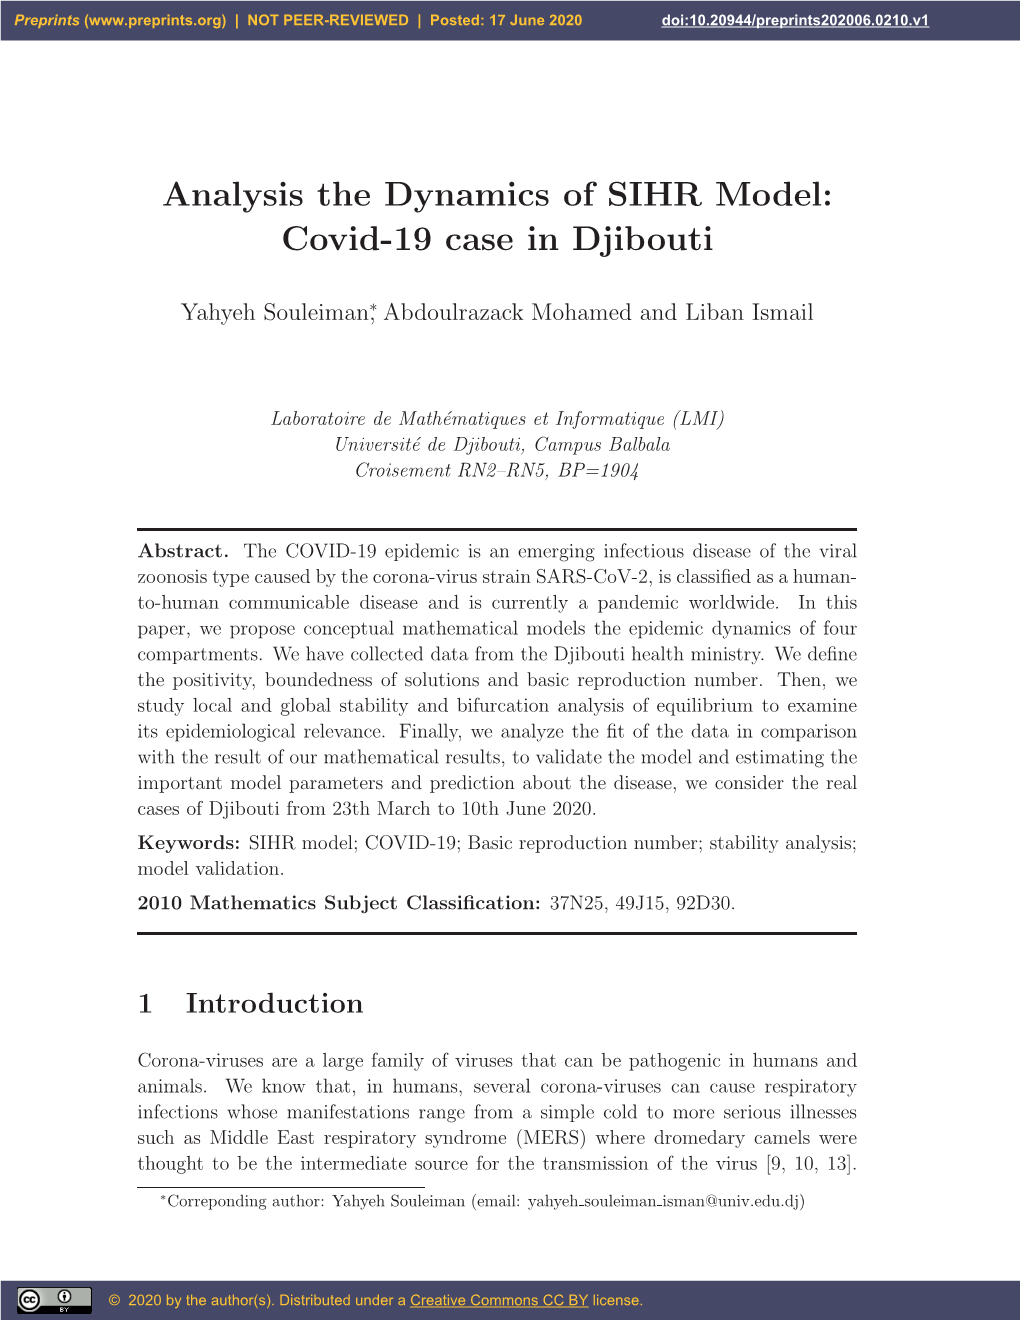 Analysis the Dynamics of SIHR Model: Covid-19 Case in Djibouti